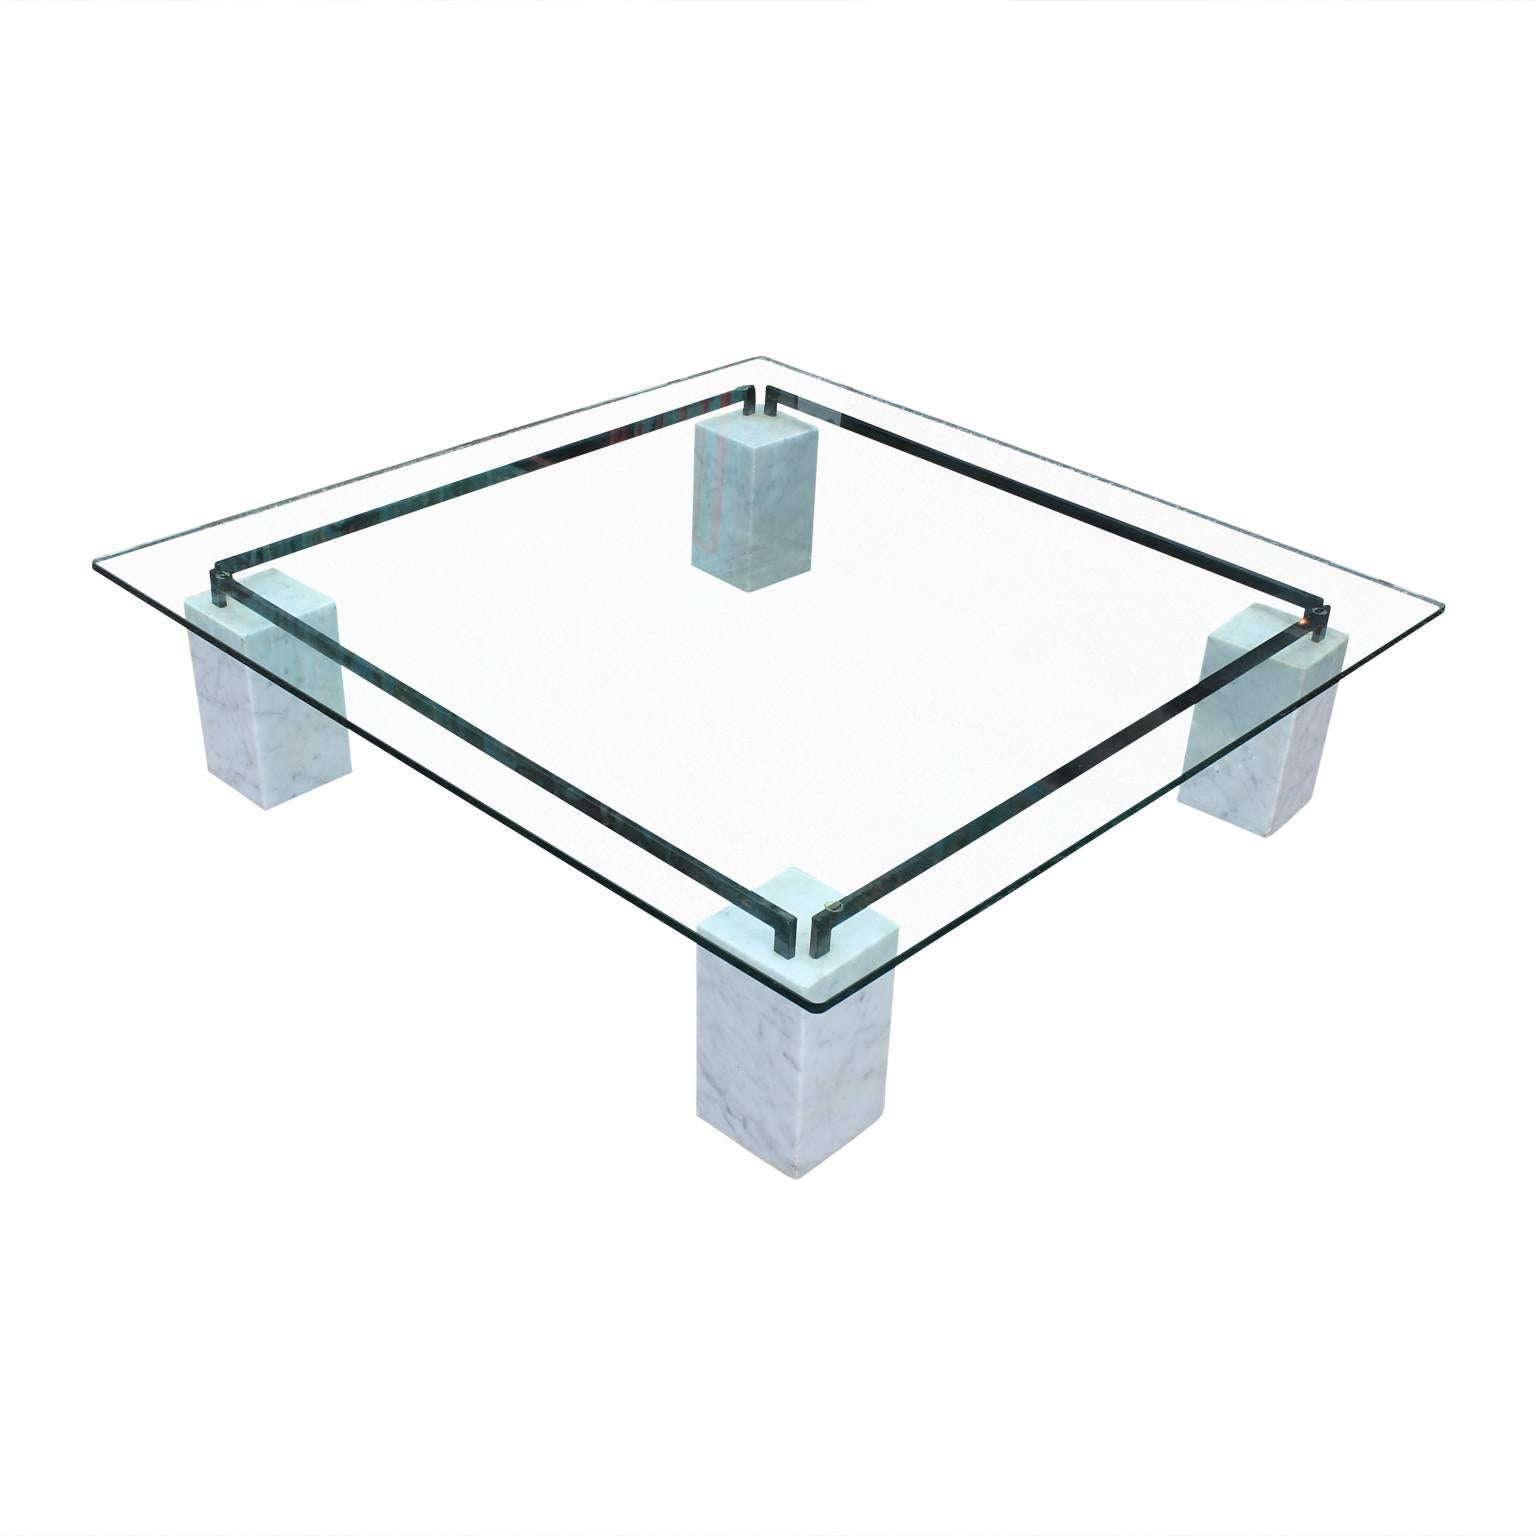 Gorgeous modern square glass Cattelan coffee table with Carrara marble bases and an iron frame. Perfect for the modern home!